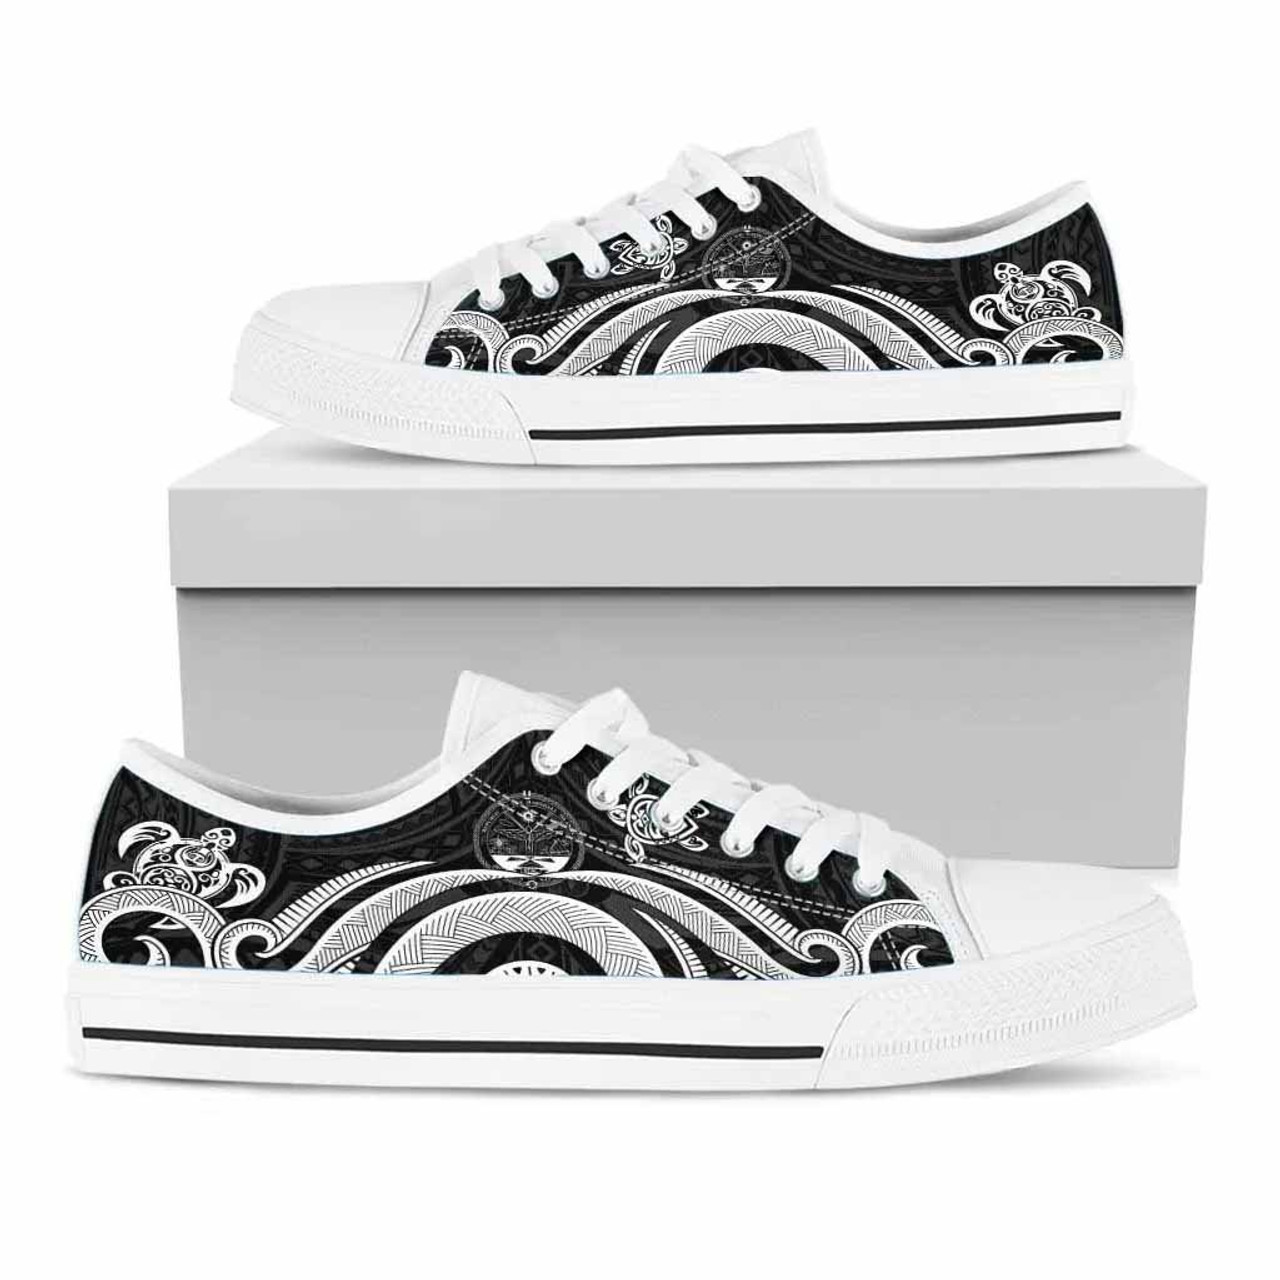 Marshall Islands Low Top Canvas Shoes - White Tentacle Turtle Crest 5